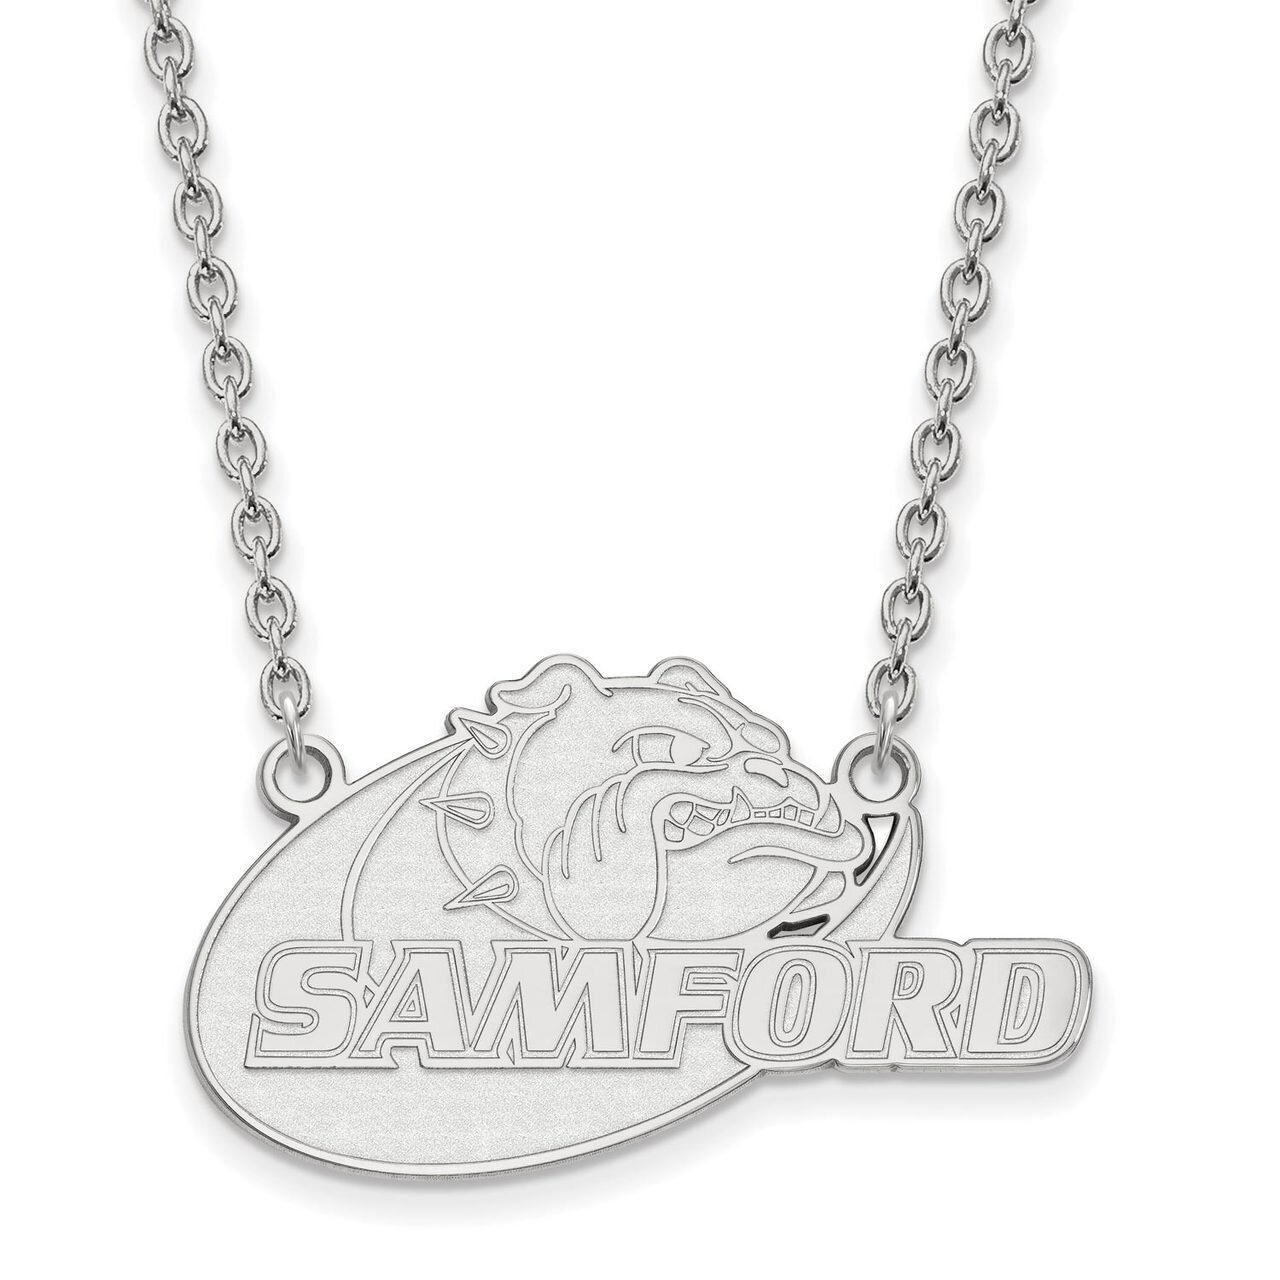 Samford University Large Pendant with Chain Necklace 14k White Gold 4W008SMF-18